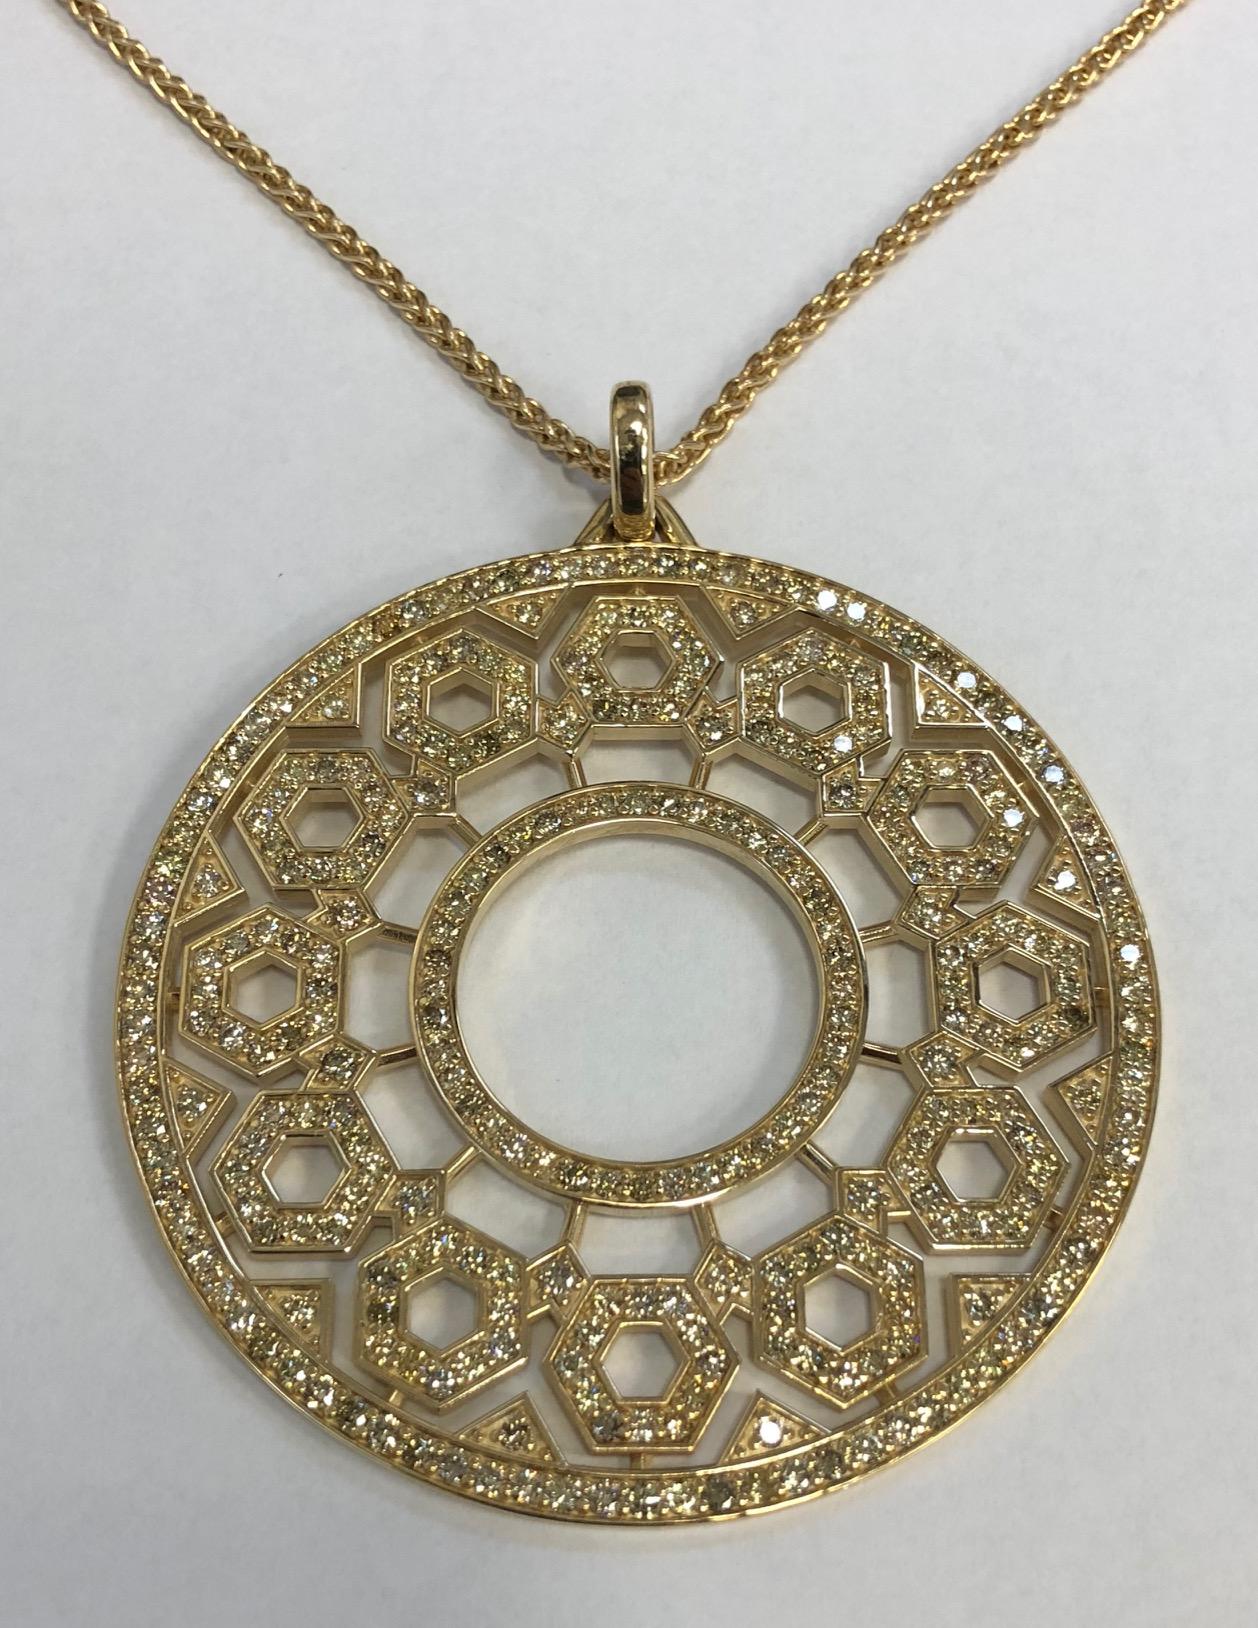 The 14K gold and diamond pendant is quite a large and bold statement. Measuring over 2.5 inches in diameter, It is bead set with 8.85 carats of natural fancy yellow and brown diamonds in varying shades. Inspired by the geometric design of manhole